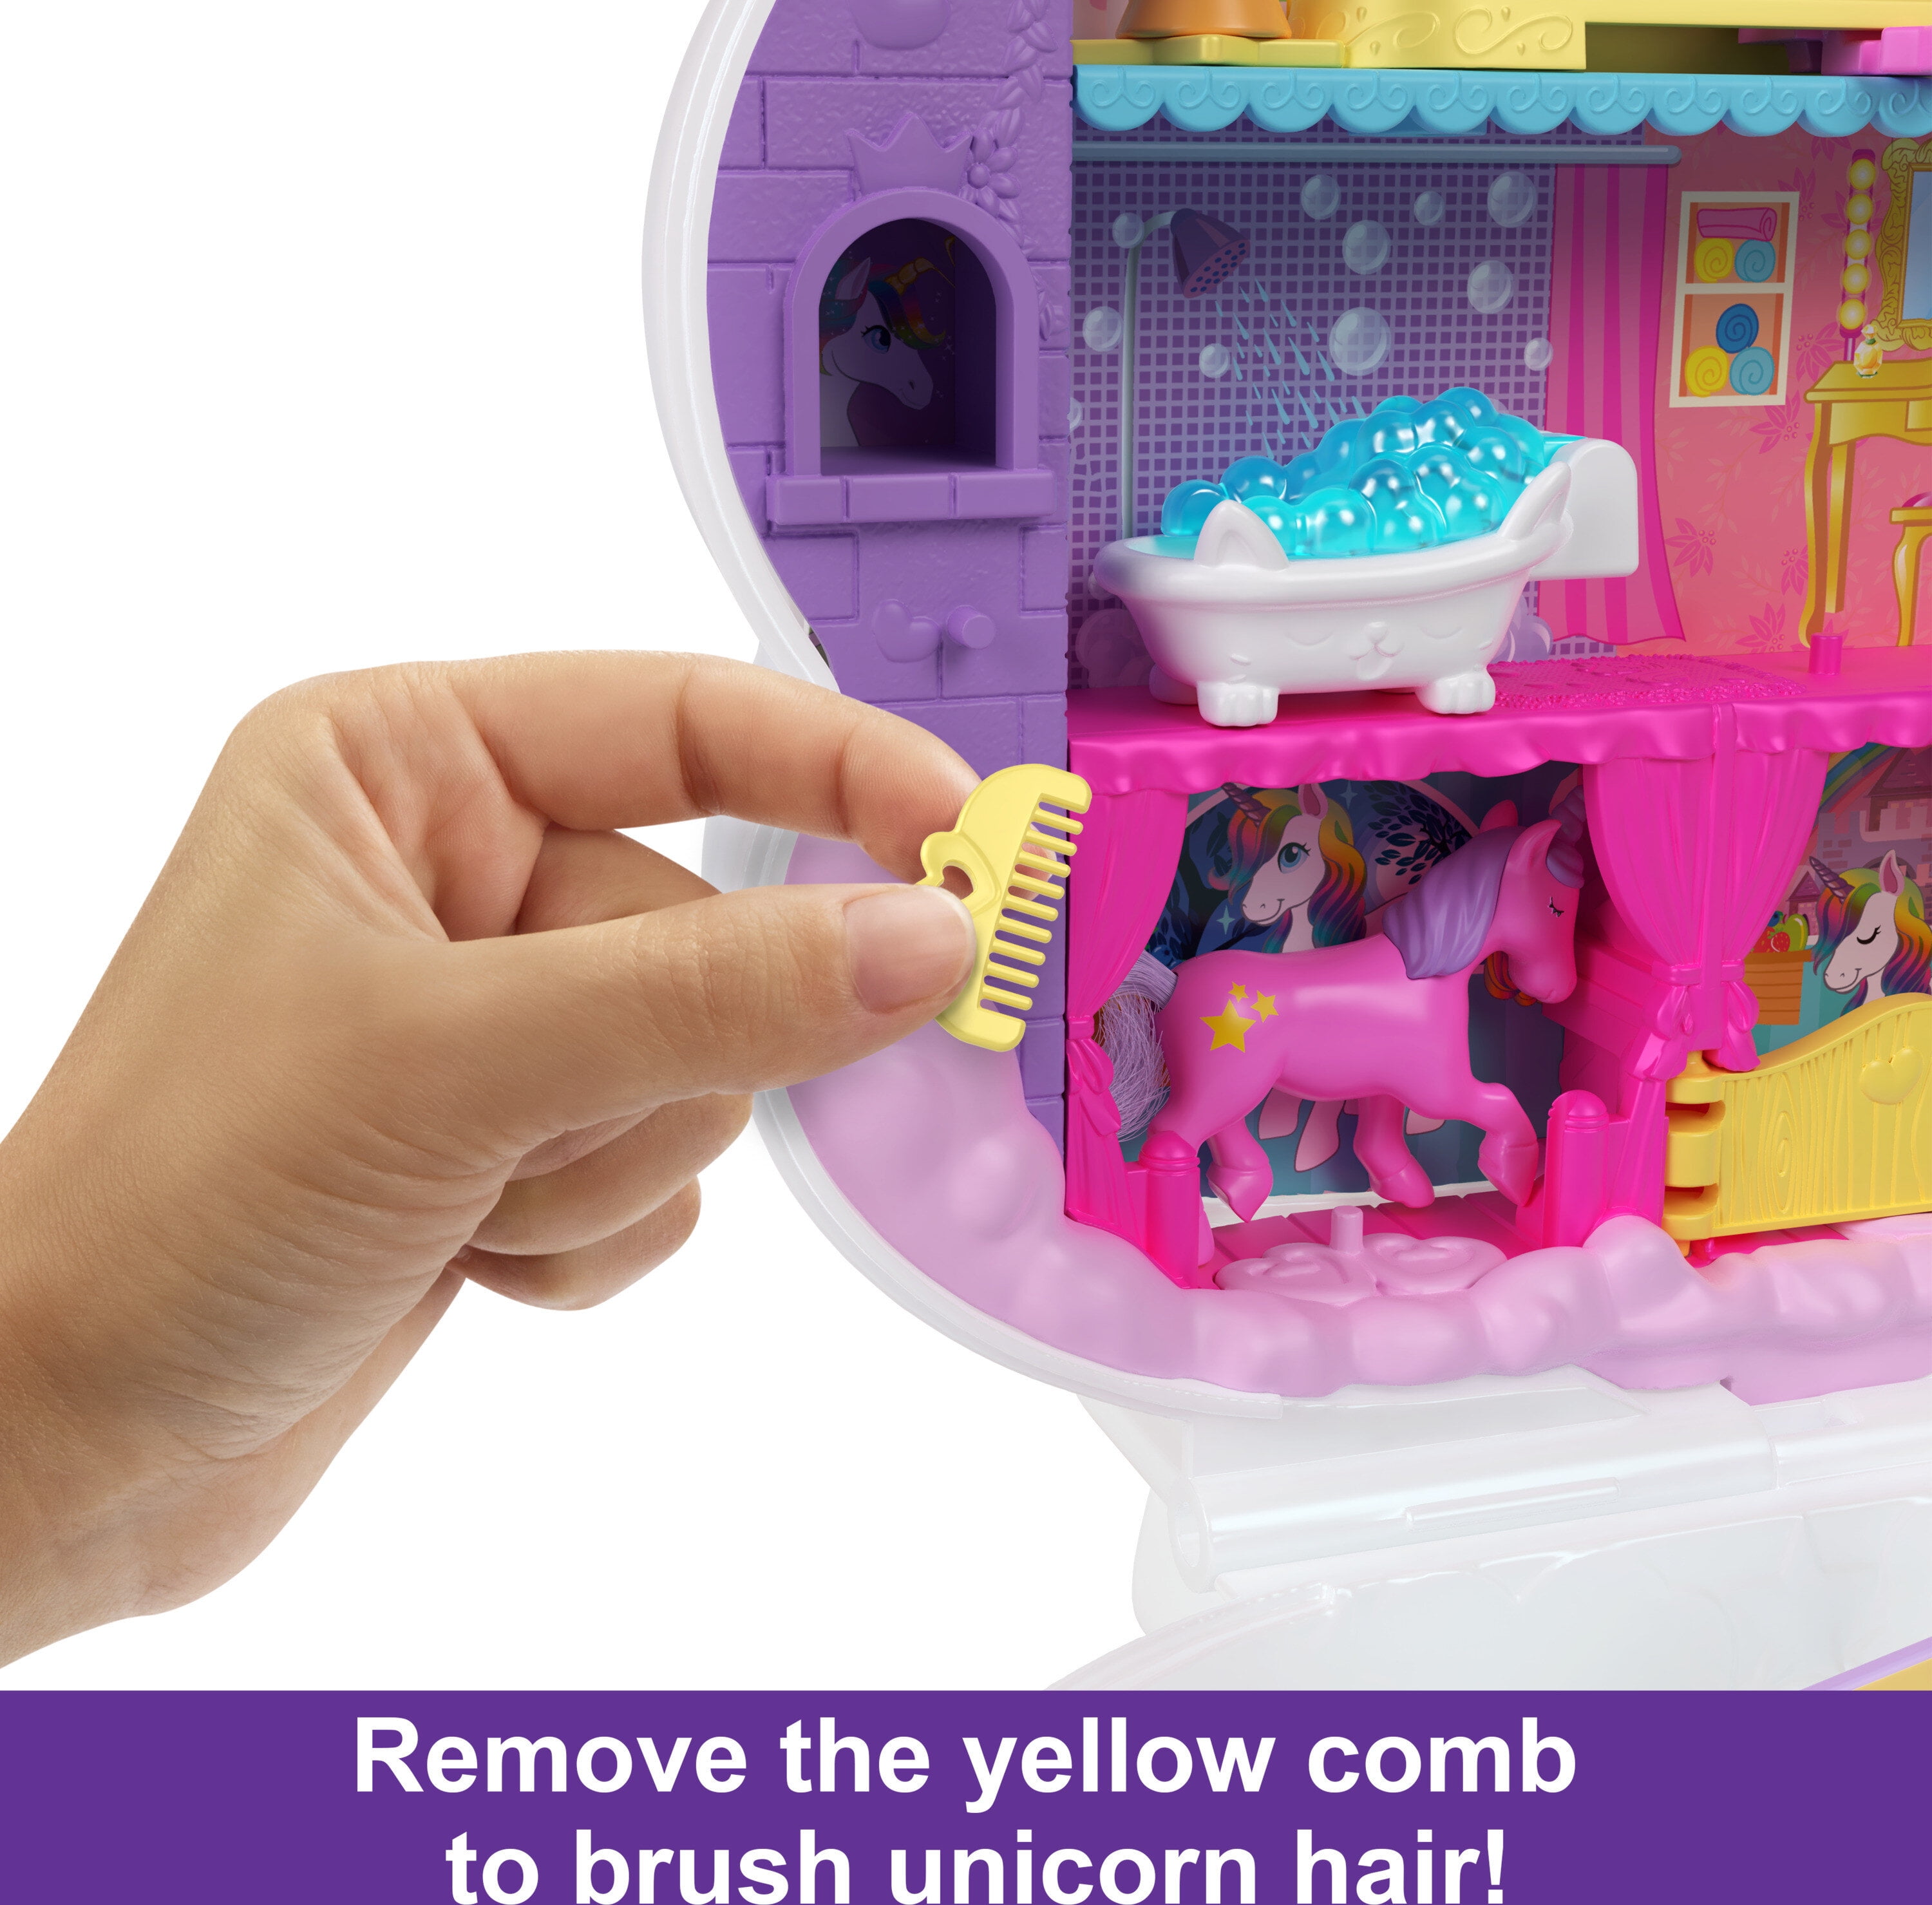 Polly Pocket 2-in-1 Unicorn Party Travel Toy, Large Compact with 2